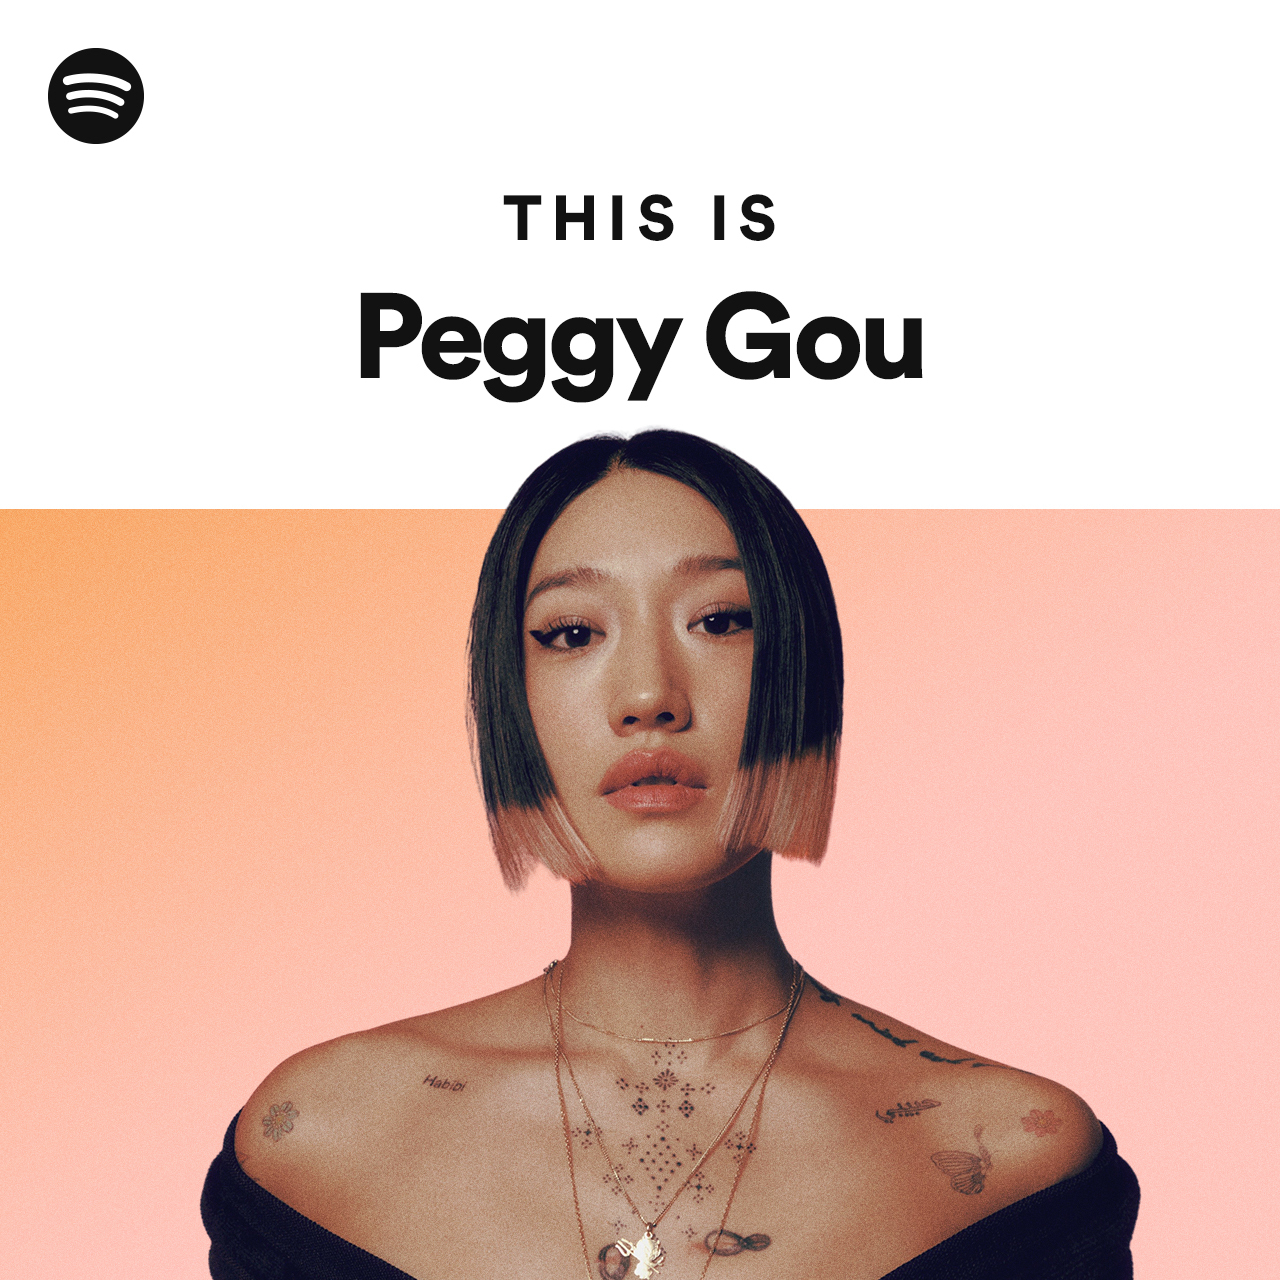 Peggy Gou - See you in egypt !